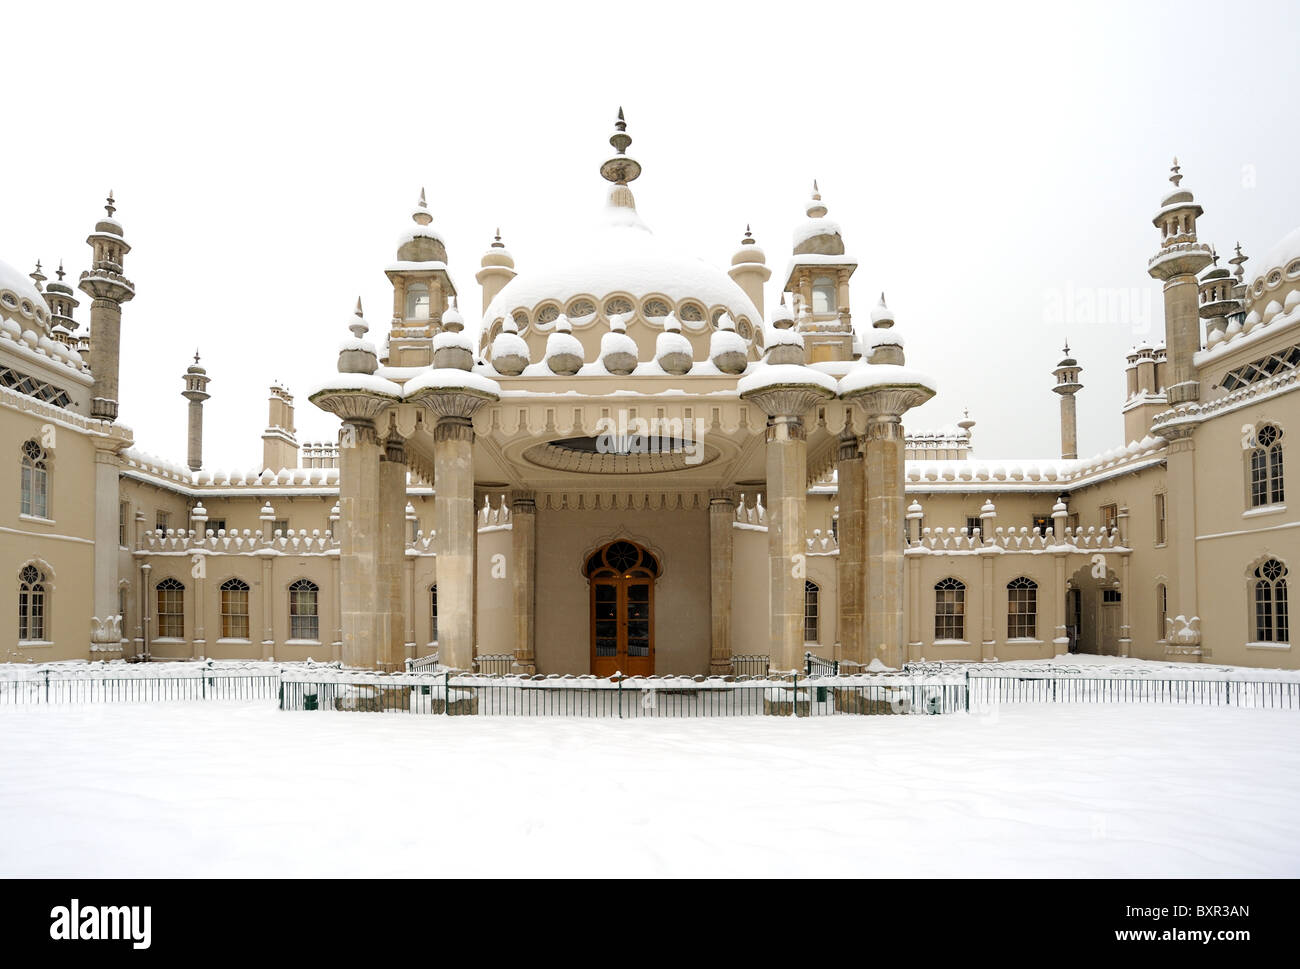 The Royal Pavillion covered in snow Stock Photo